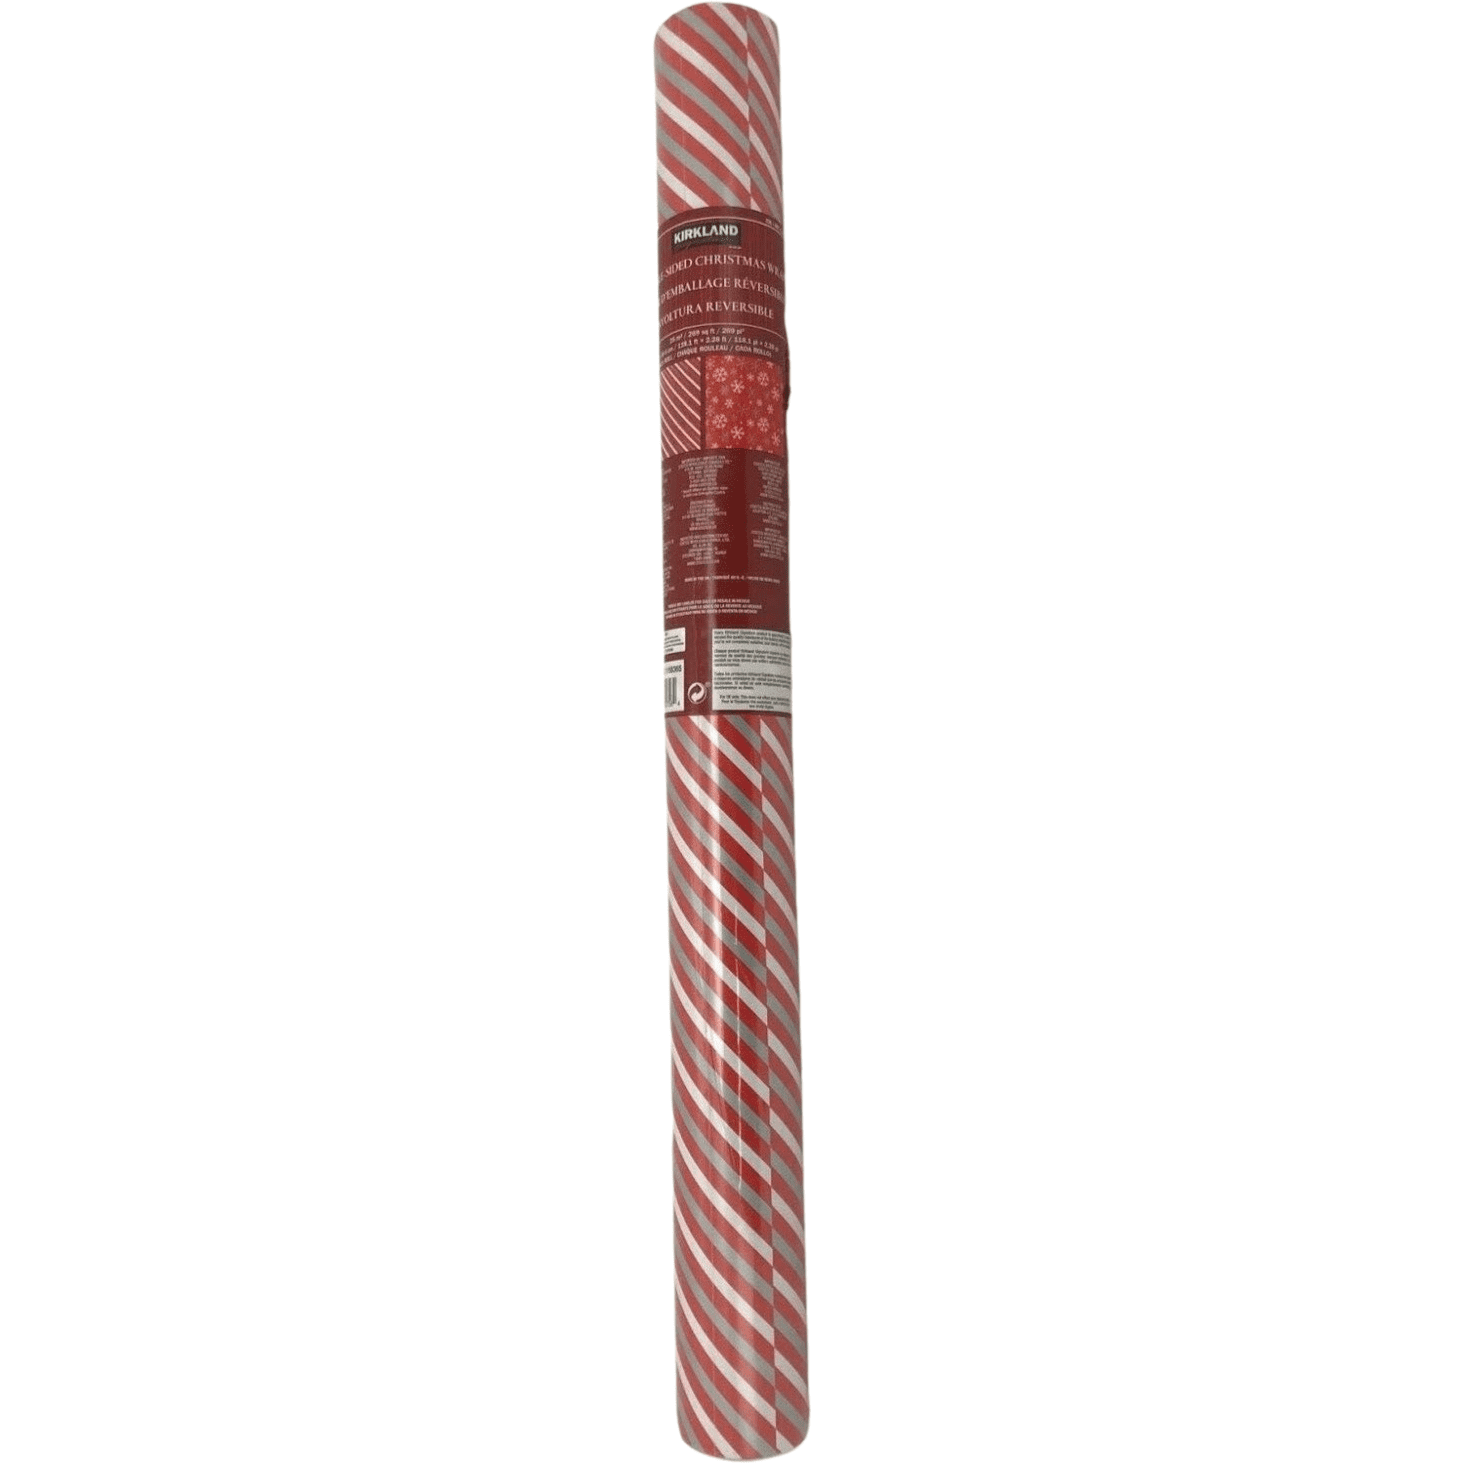 Kirkland Christmas Wrapping Paper / Holiday Wrapping Paper / Double Sided / Red, White & Silver